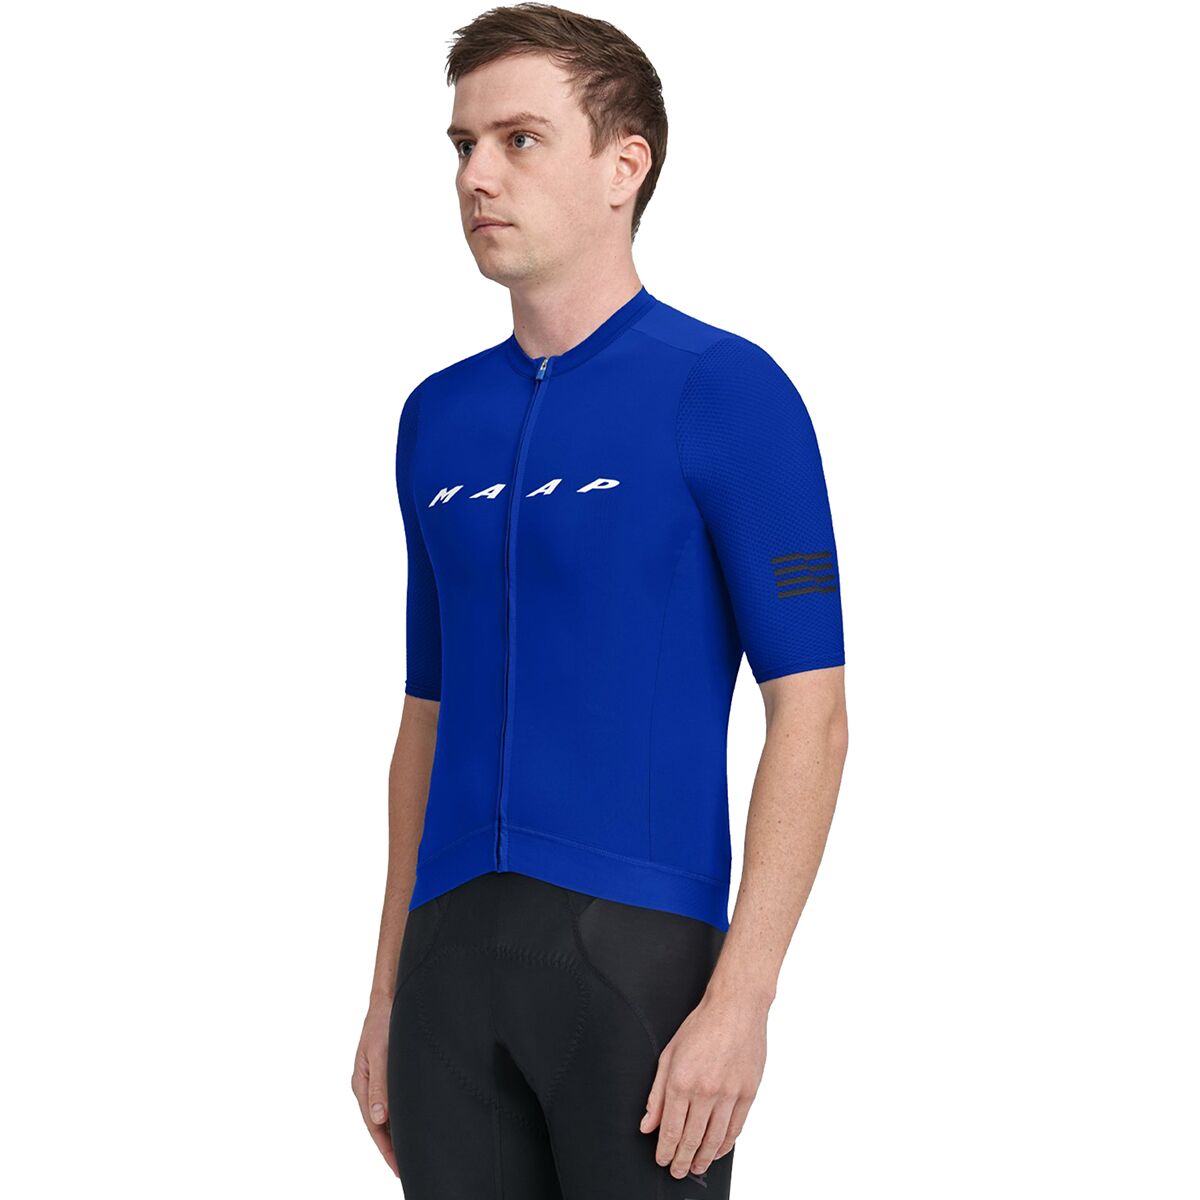 Evade Pro Base Jersey - Men's by MAAP | US-Parks.com